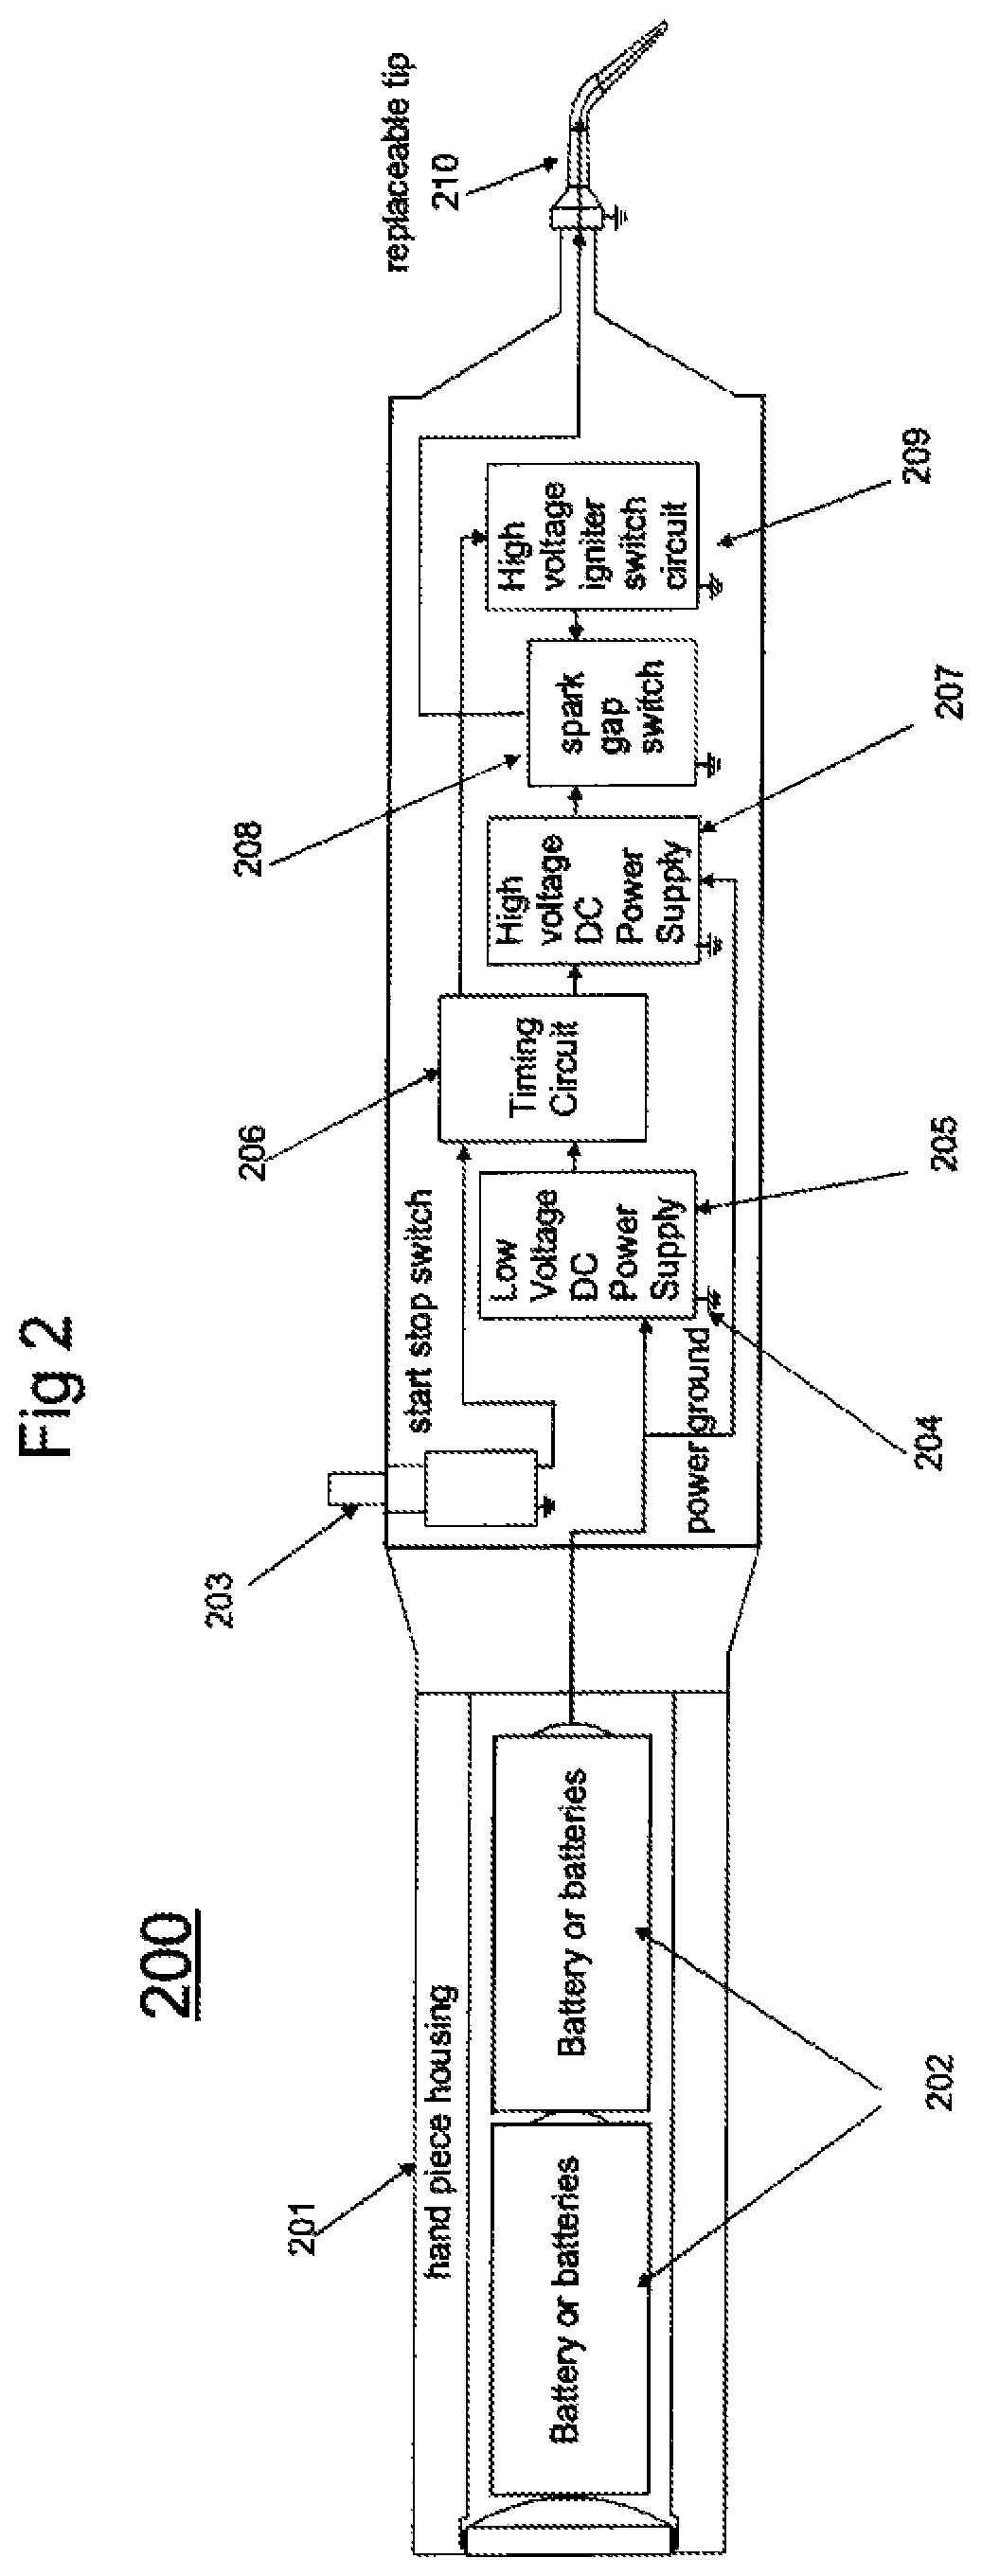 Electrical discharge irrigator apparatus and method